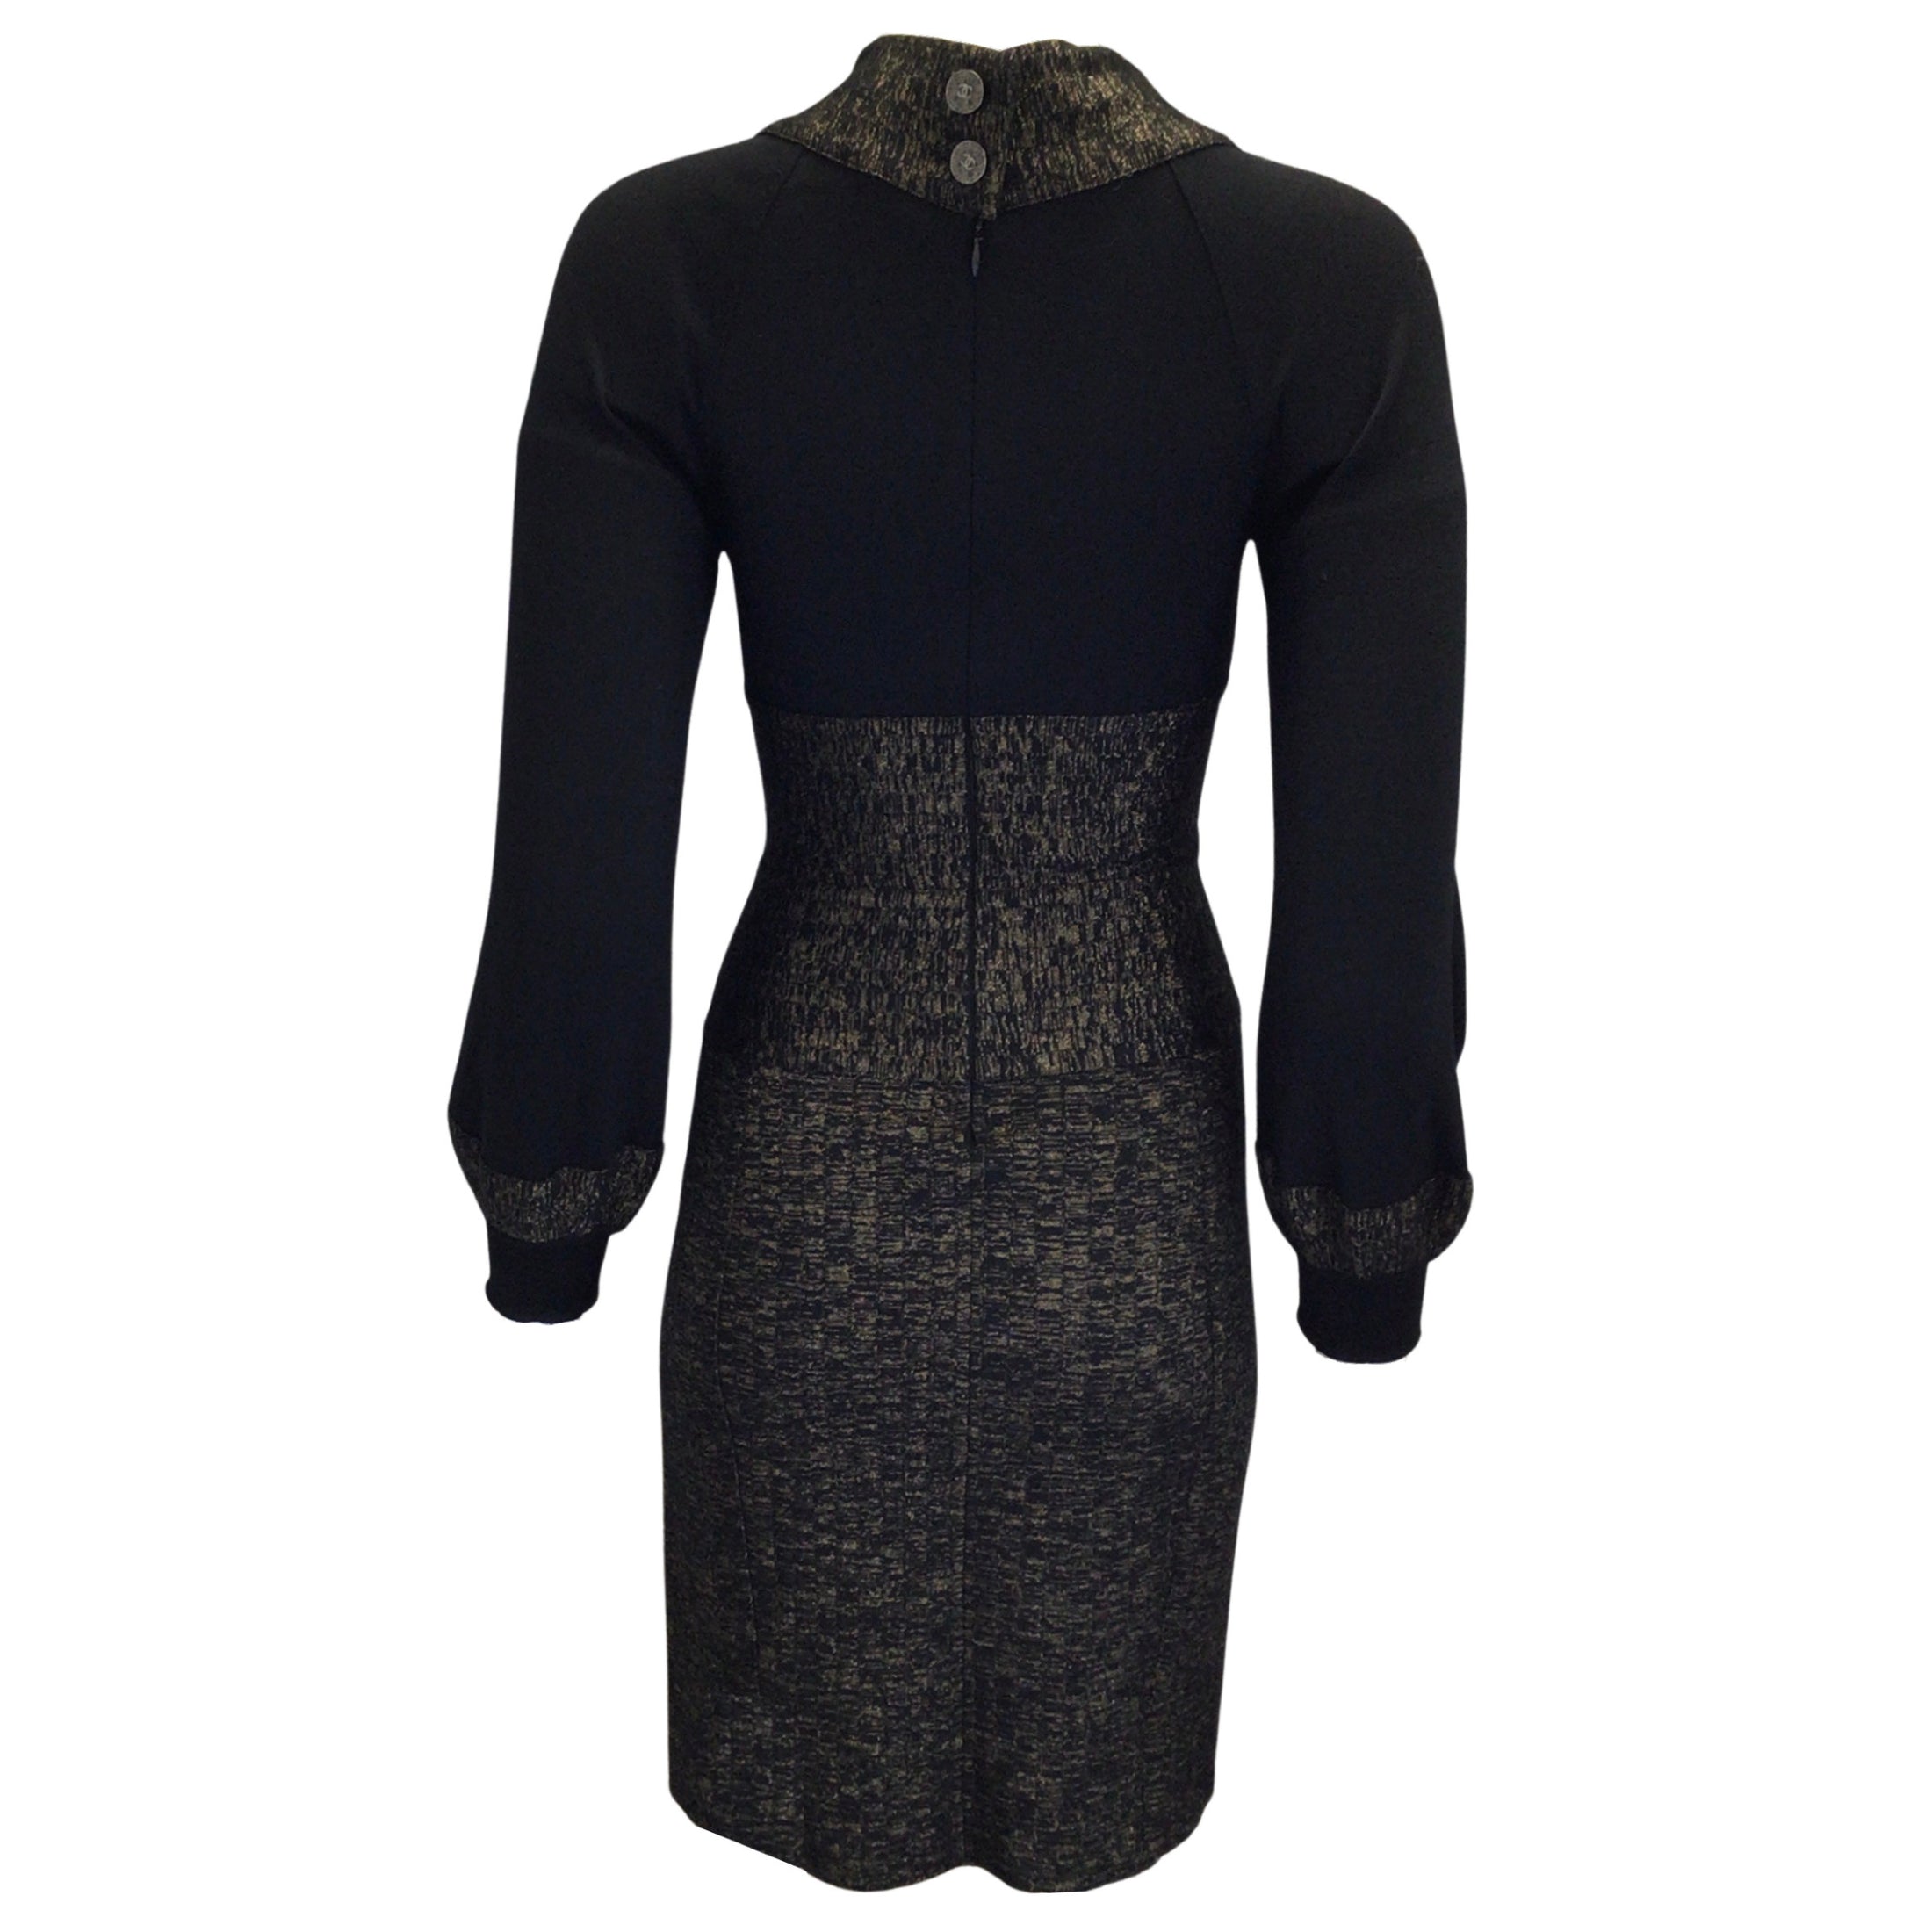 Chanel 2010 Paris Byzance Black / Gold Metallic Shimmer Detail Long Sleeved Fitted Wool Knit Dress